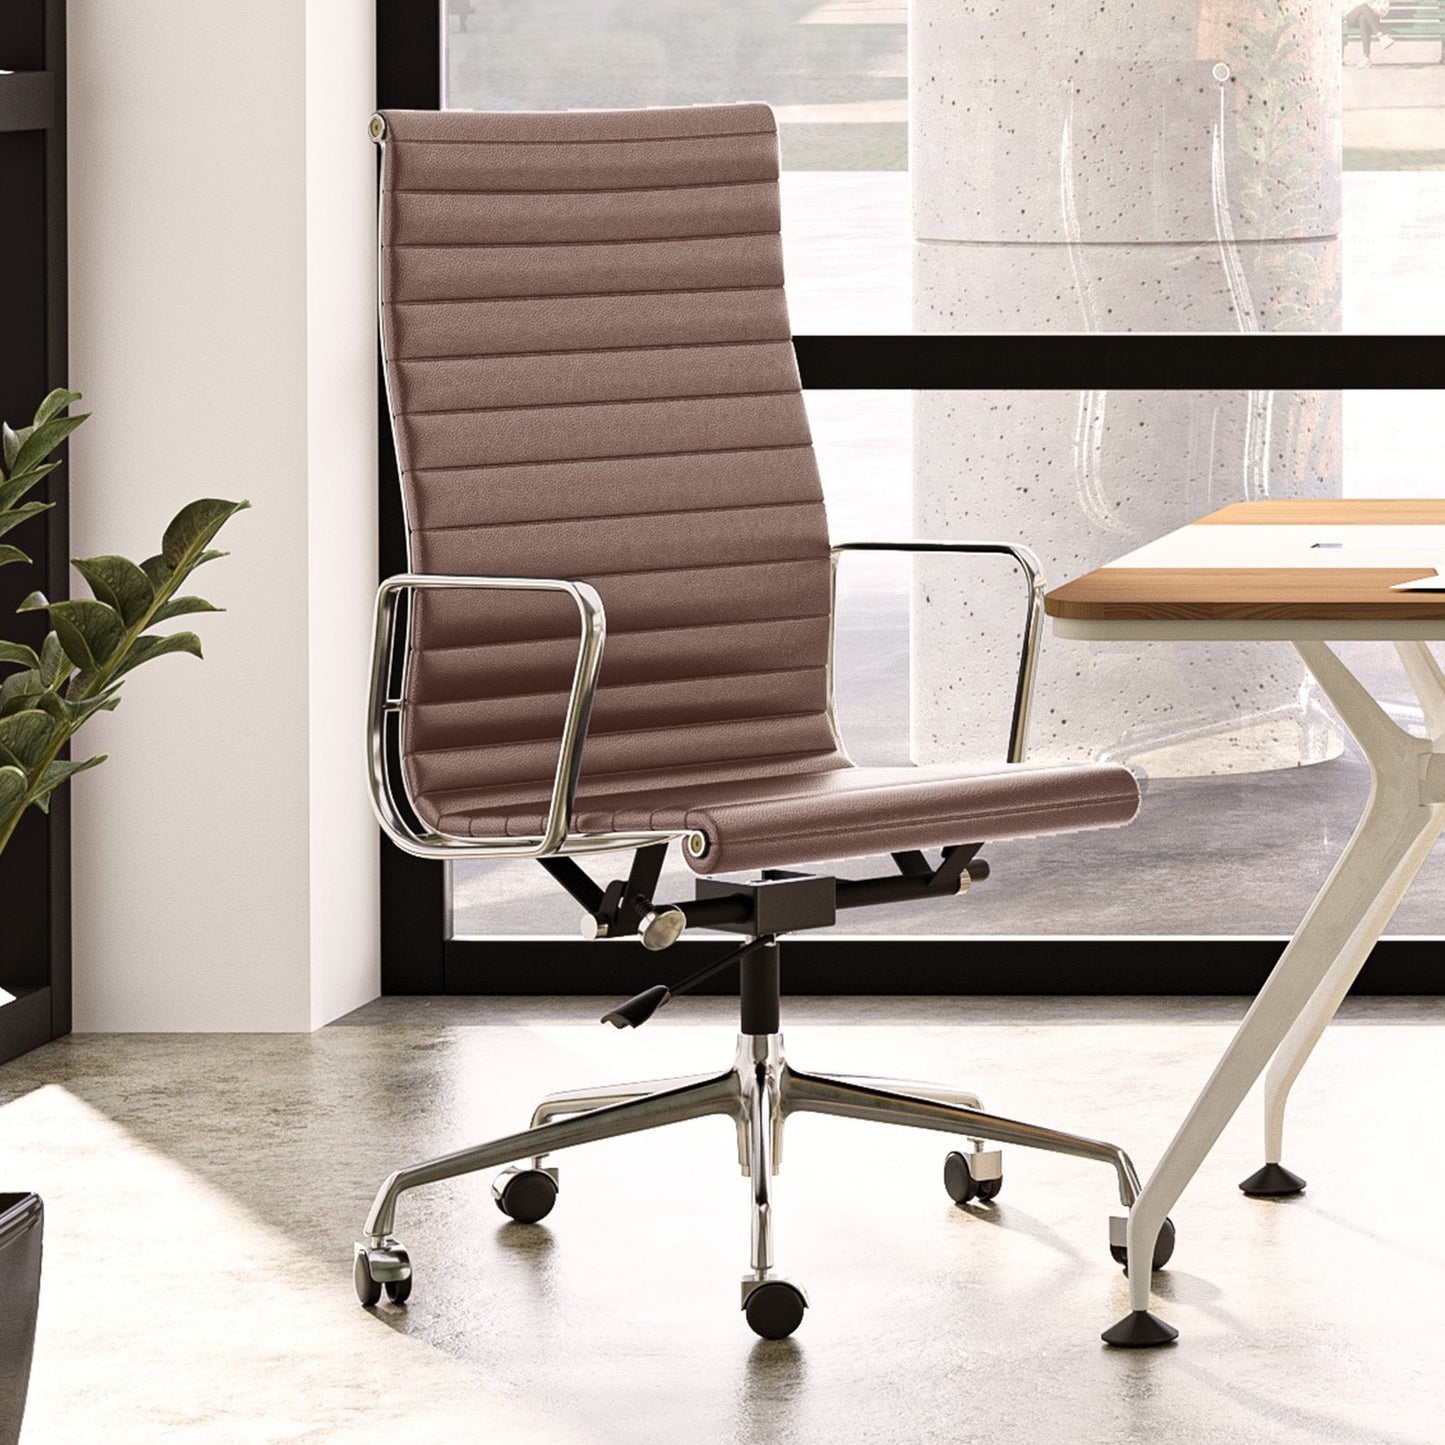 Luxuriance Designs - Eames Aluminum Group Chair - Brown Color and High Back - Review